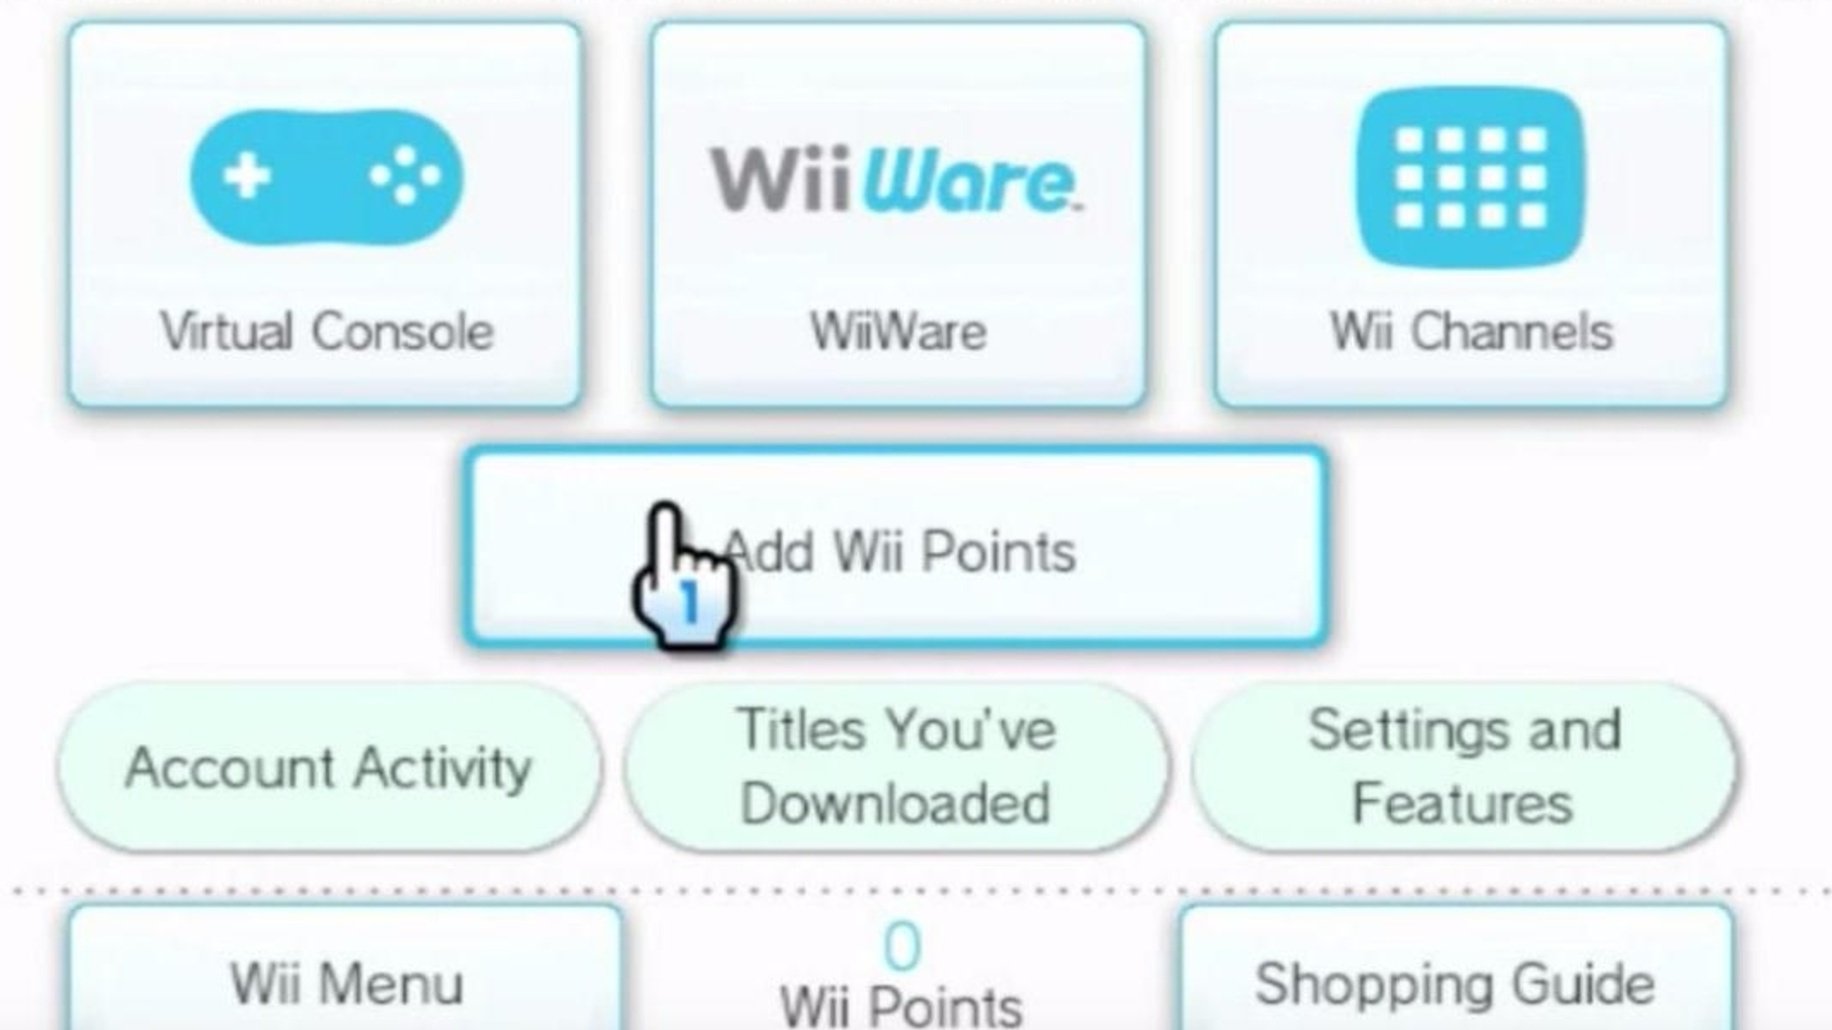 wii shop channel homebrew